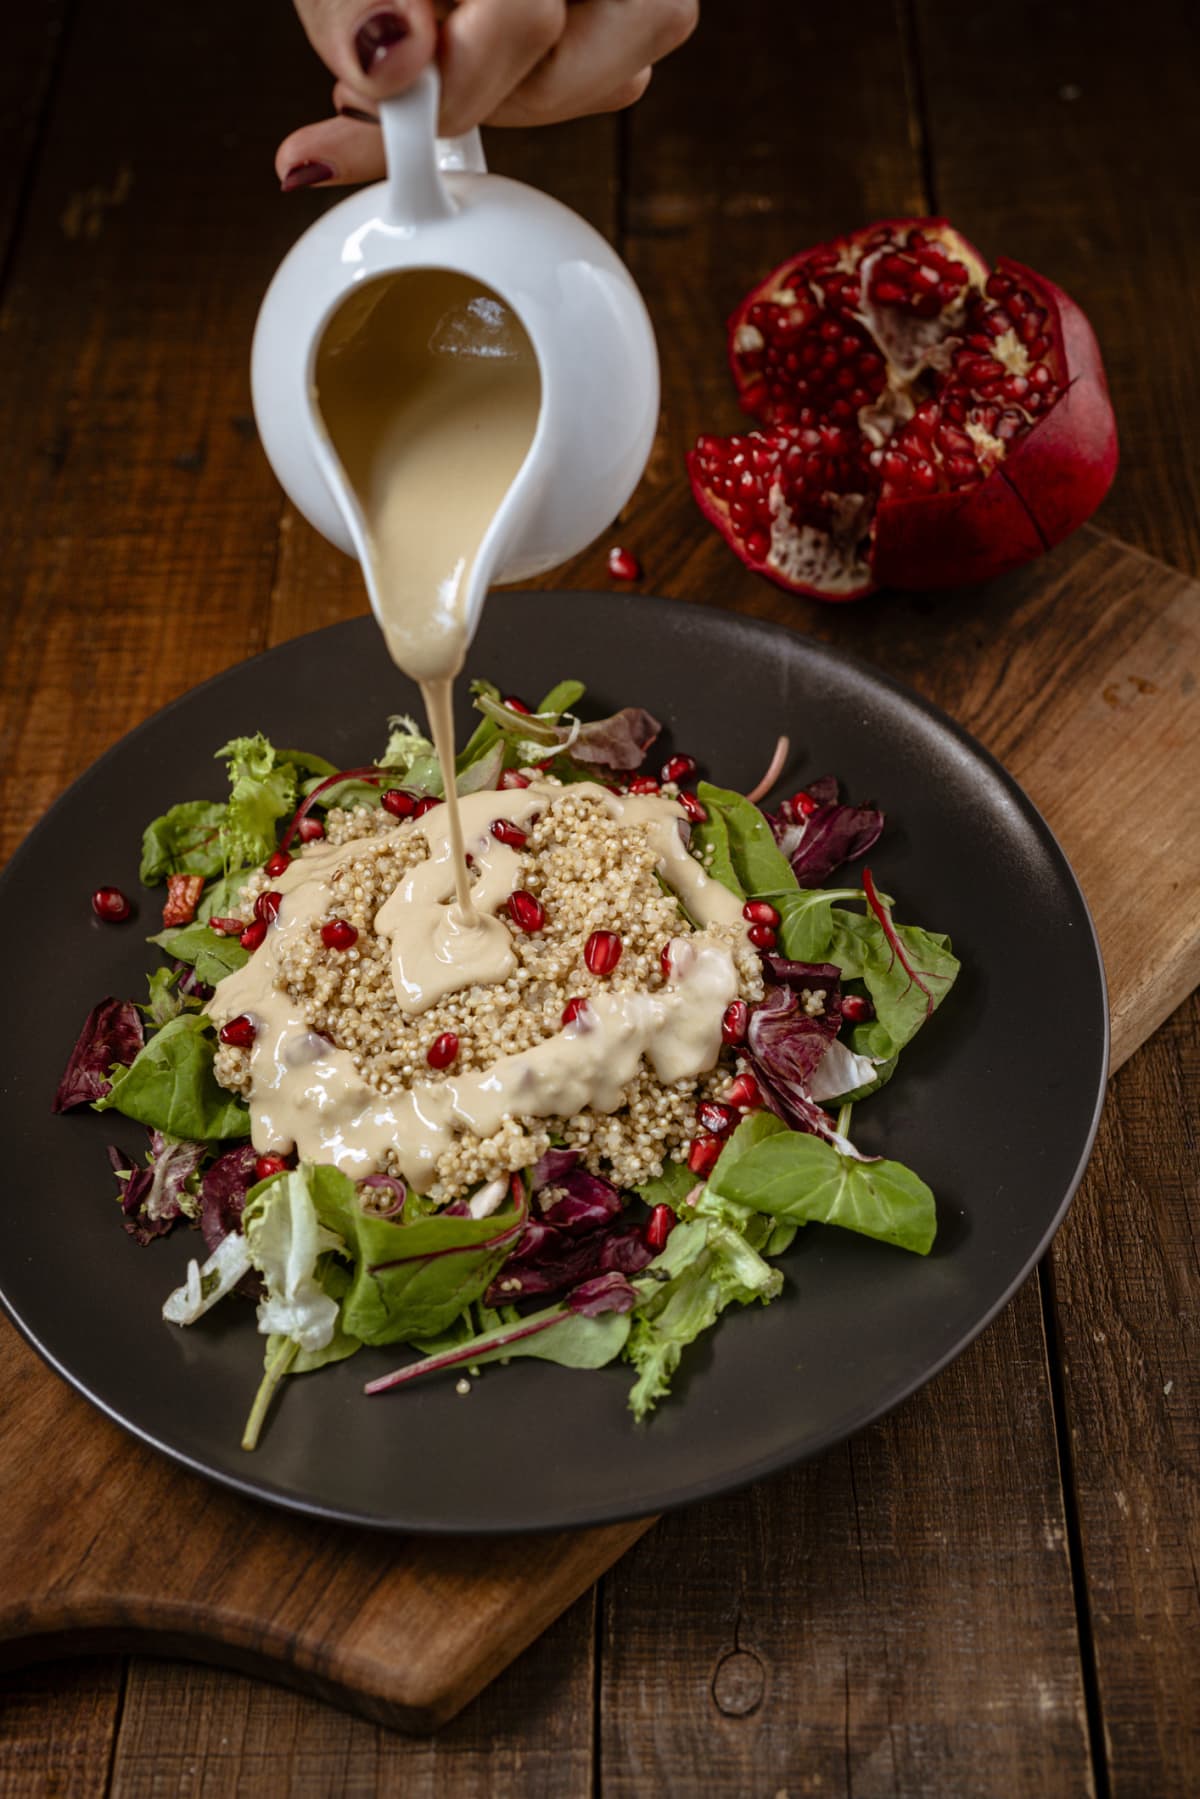 Vegan salad with millet and pomegranate with tahini dressing being poured onto it